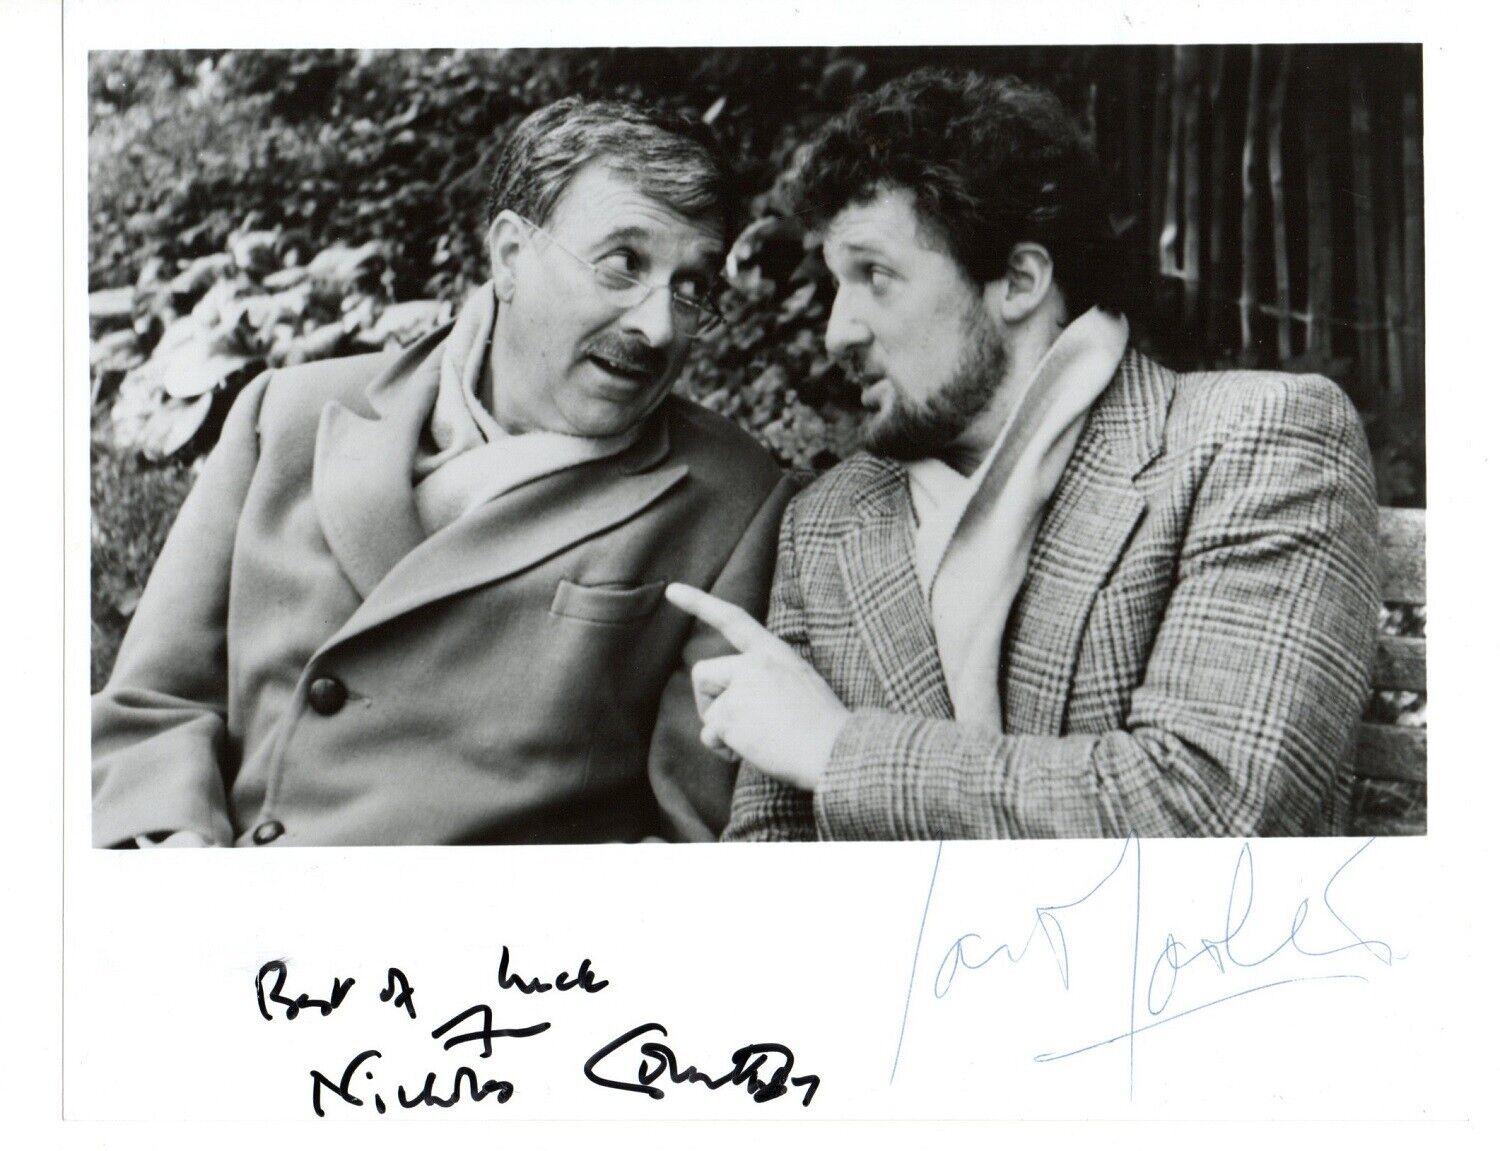 Ian Marter as Harry Sullivan in Doctor Who Signed 10x8 B/W Photo Autographed